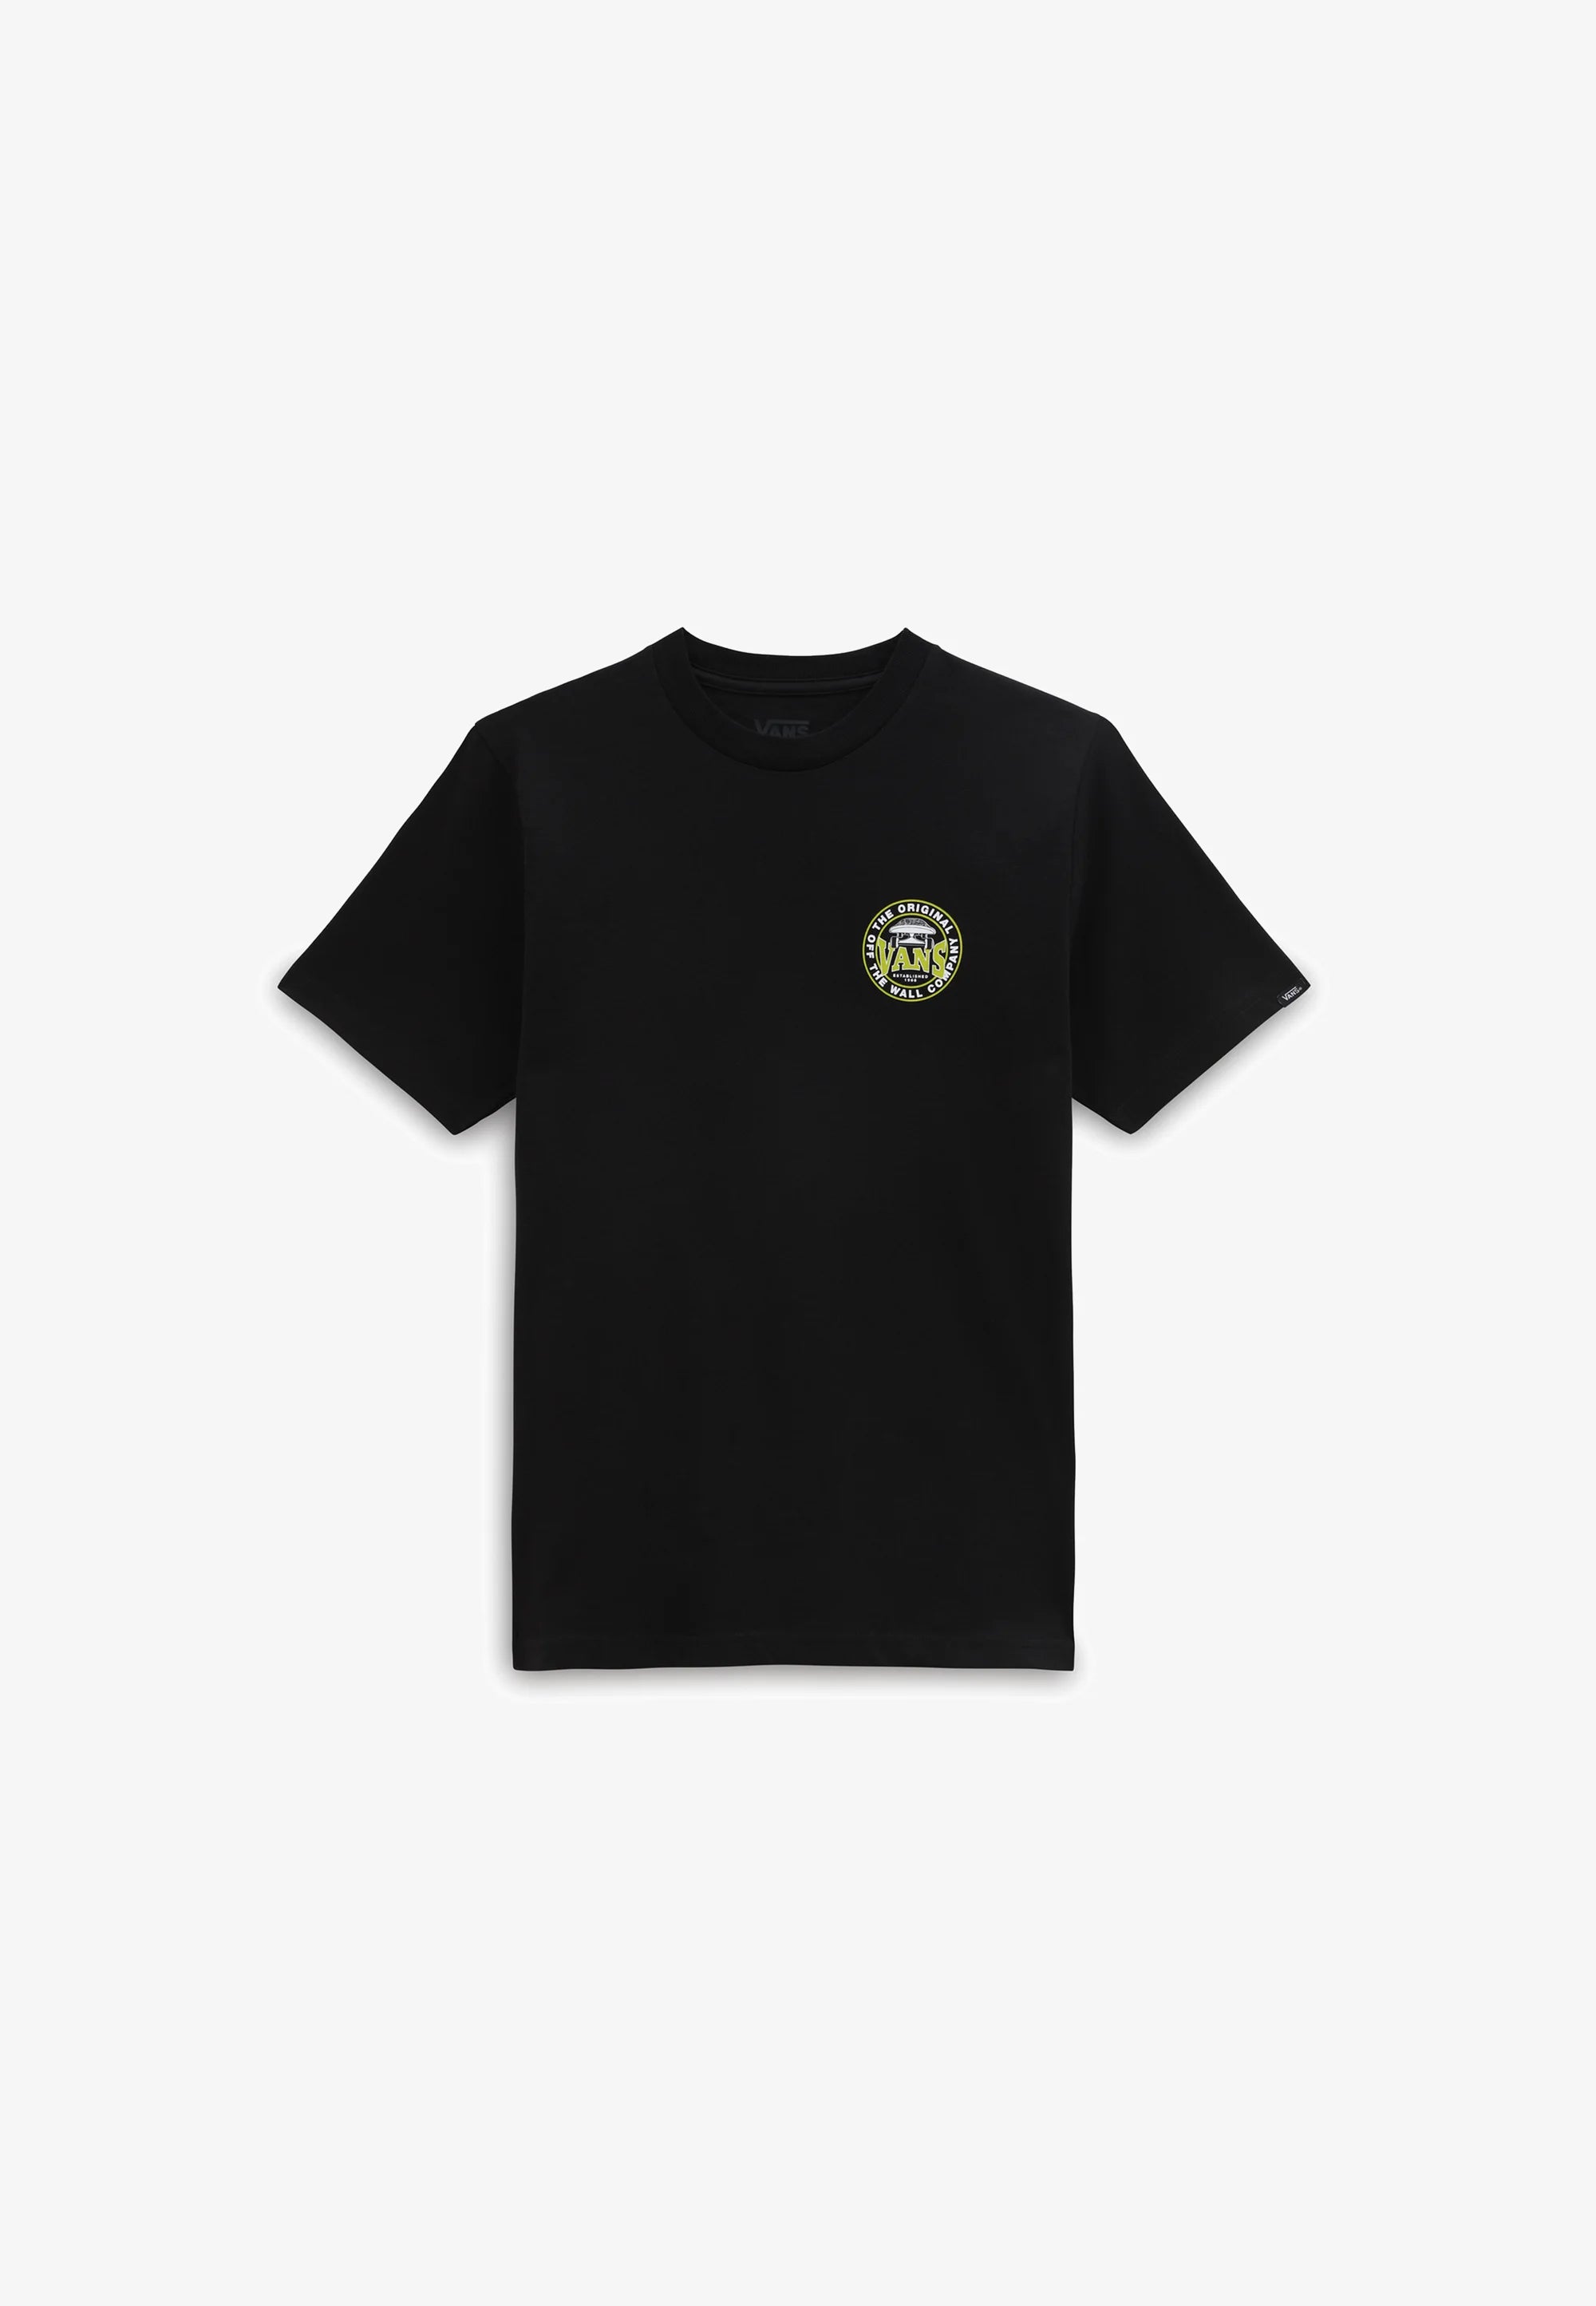 YOUTH OFF THE WALL COMPANY TEE BLACK